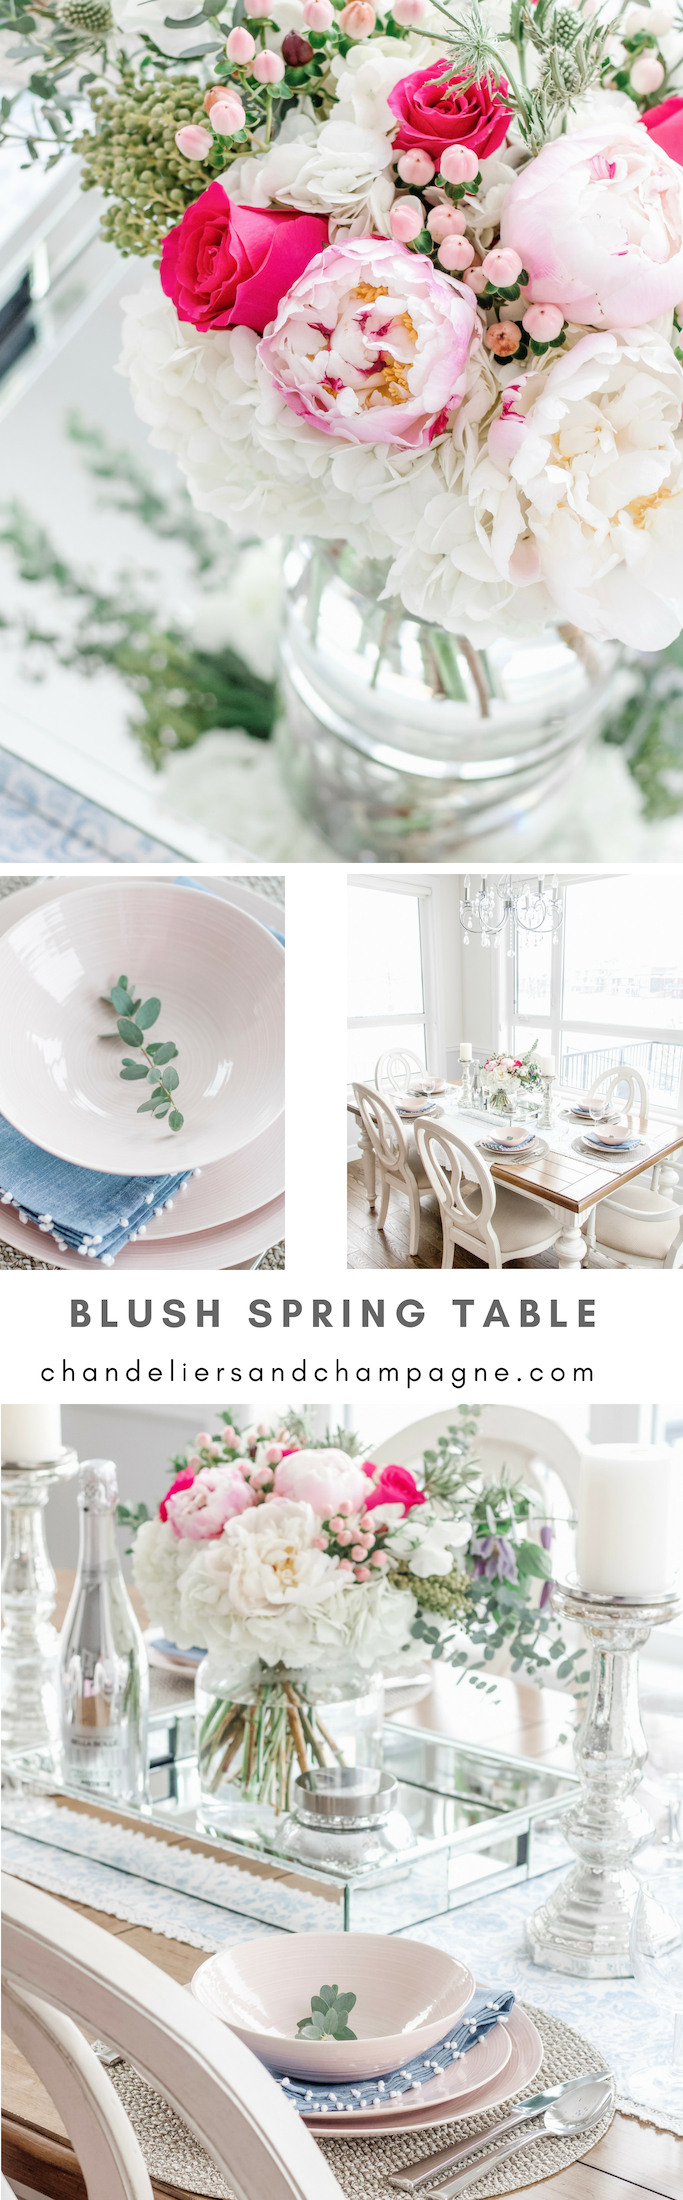 Blush spring table with pink stoneware and fresh flowers - pink spring tablescape inspiration 